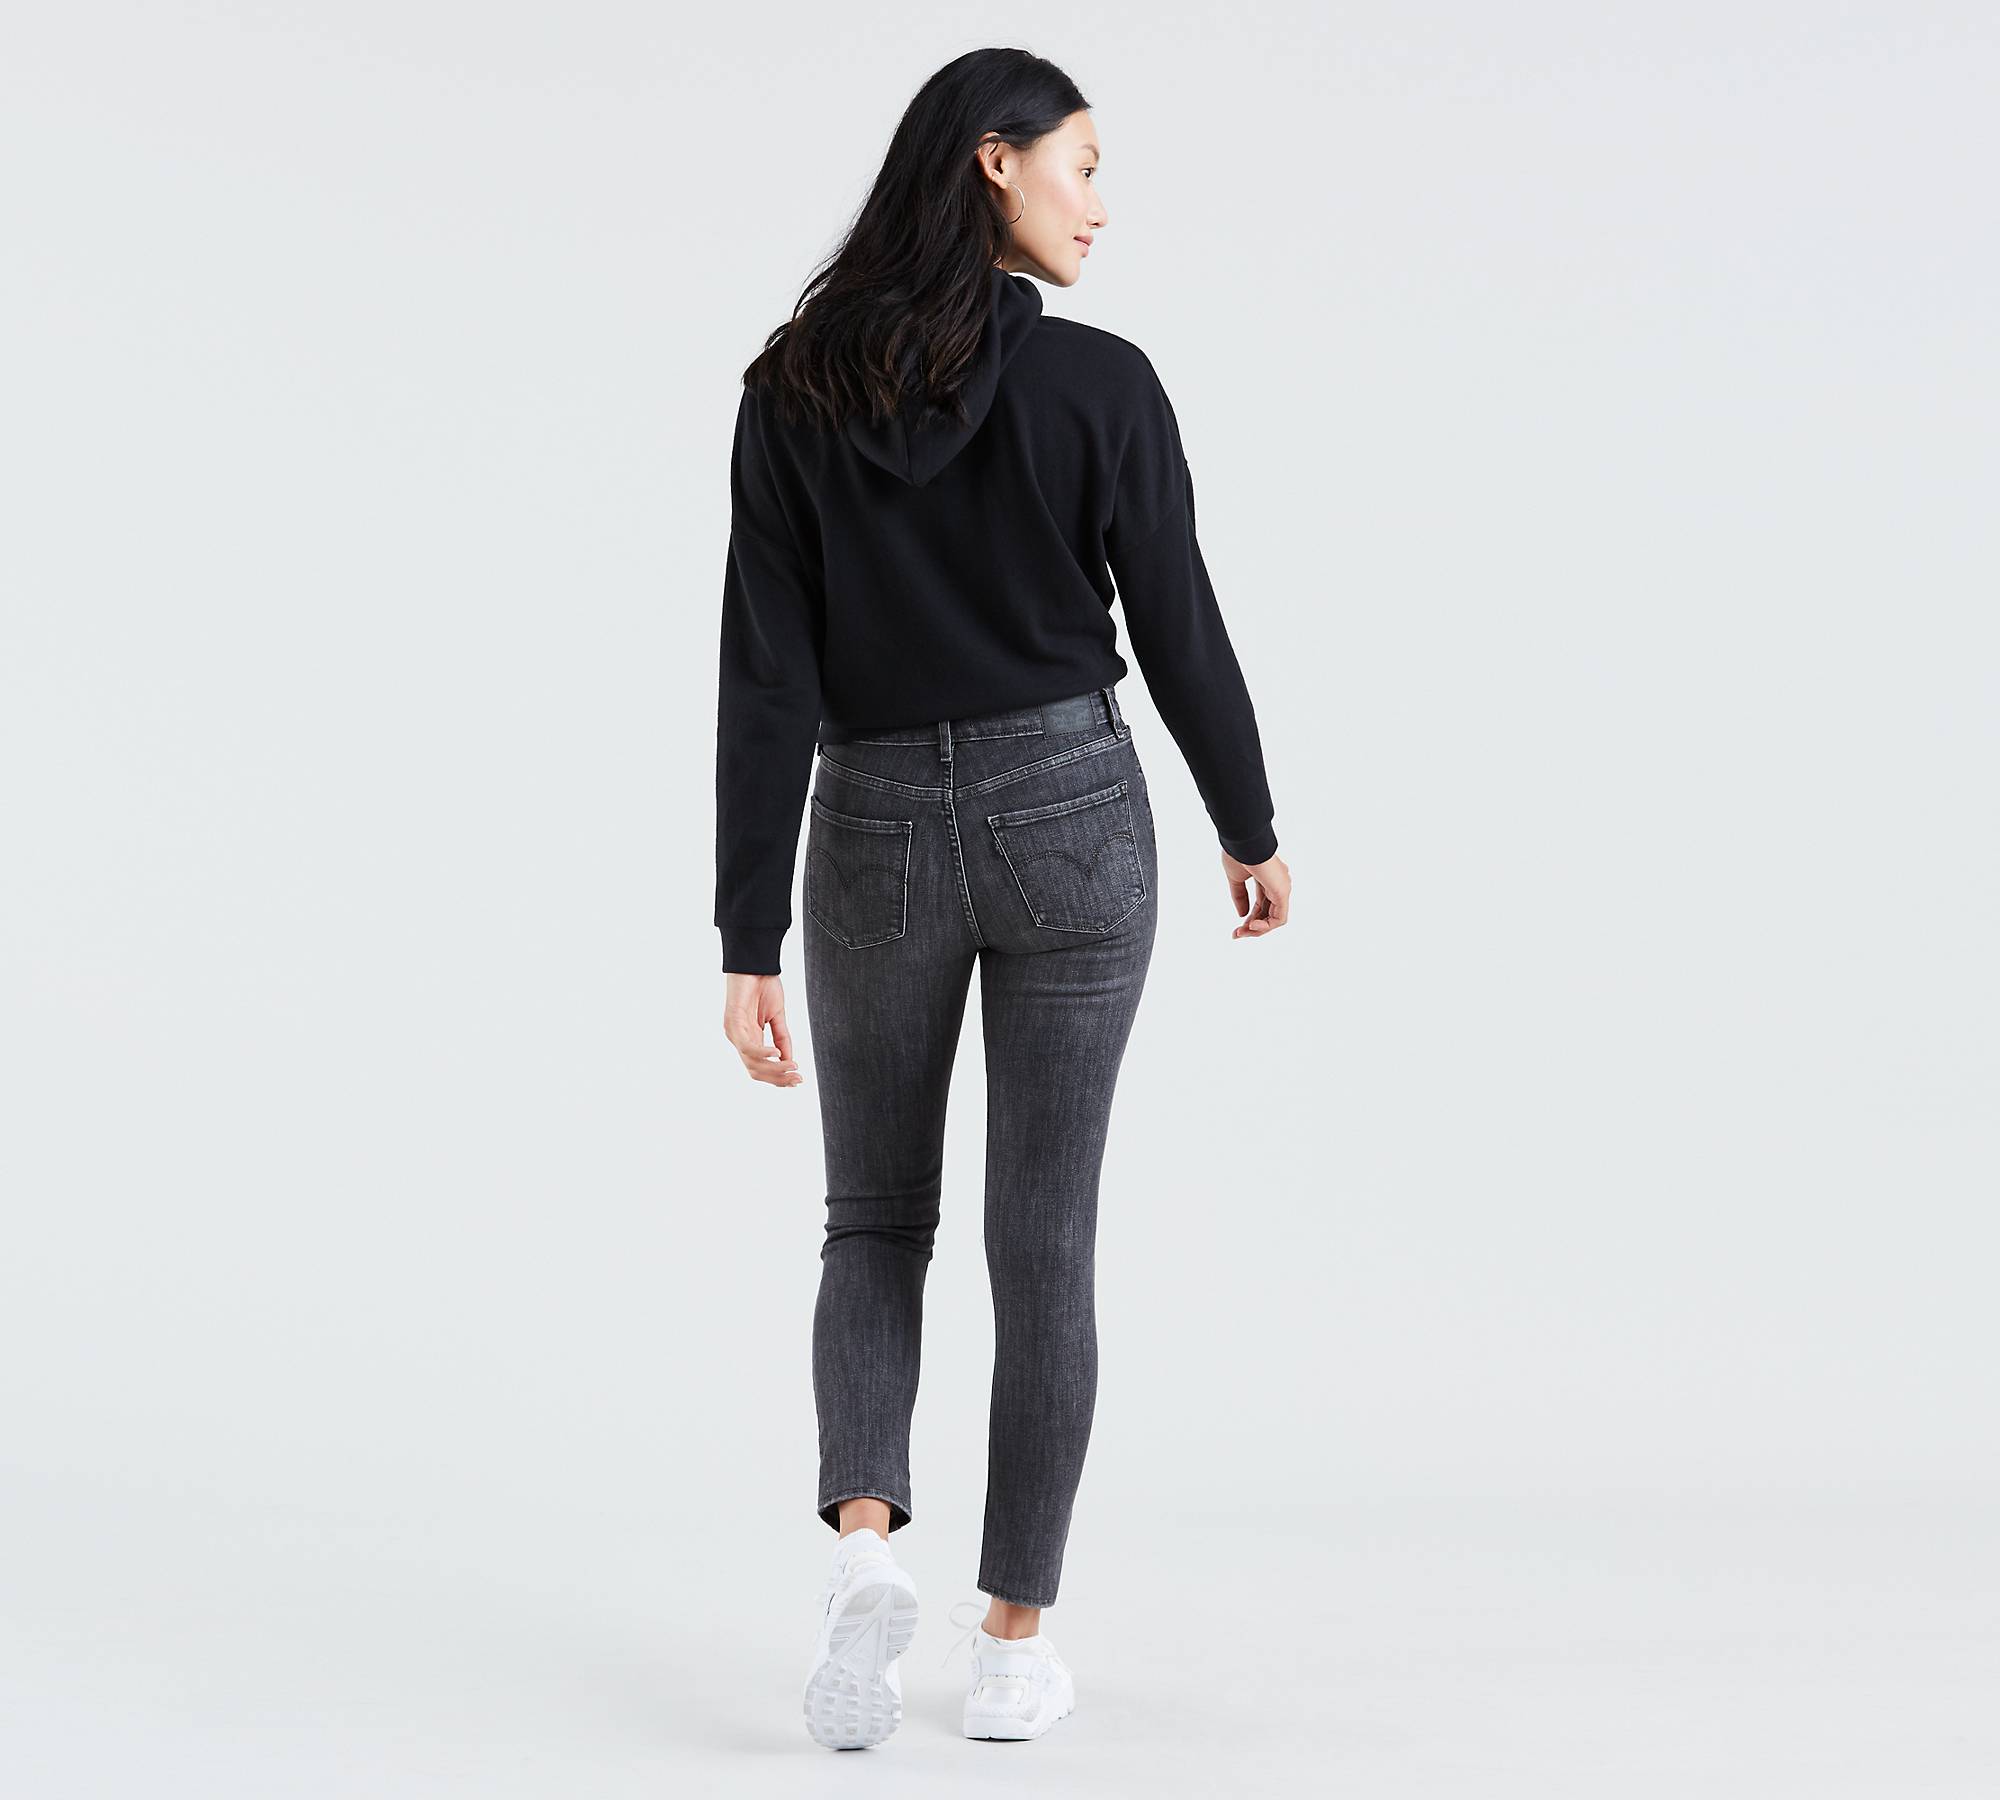 721 High Rise Ripped Skinny Women's Jeans - Grey | Levi's® US